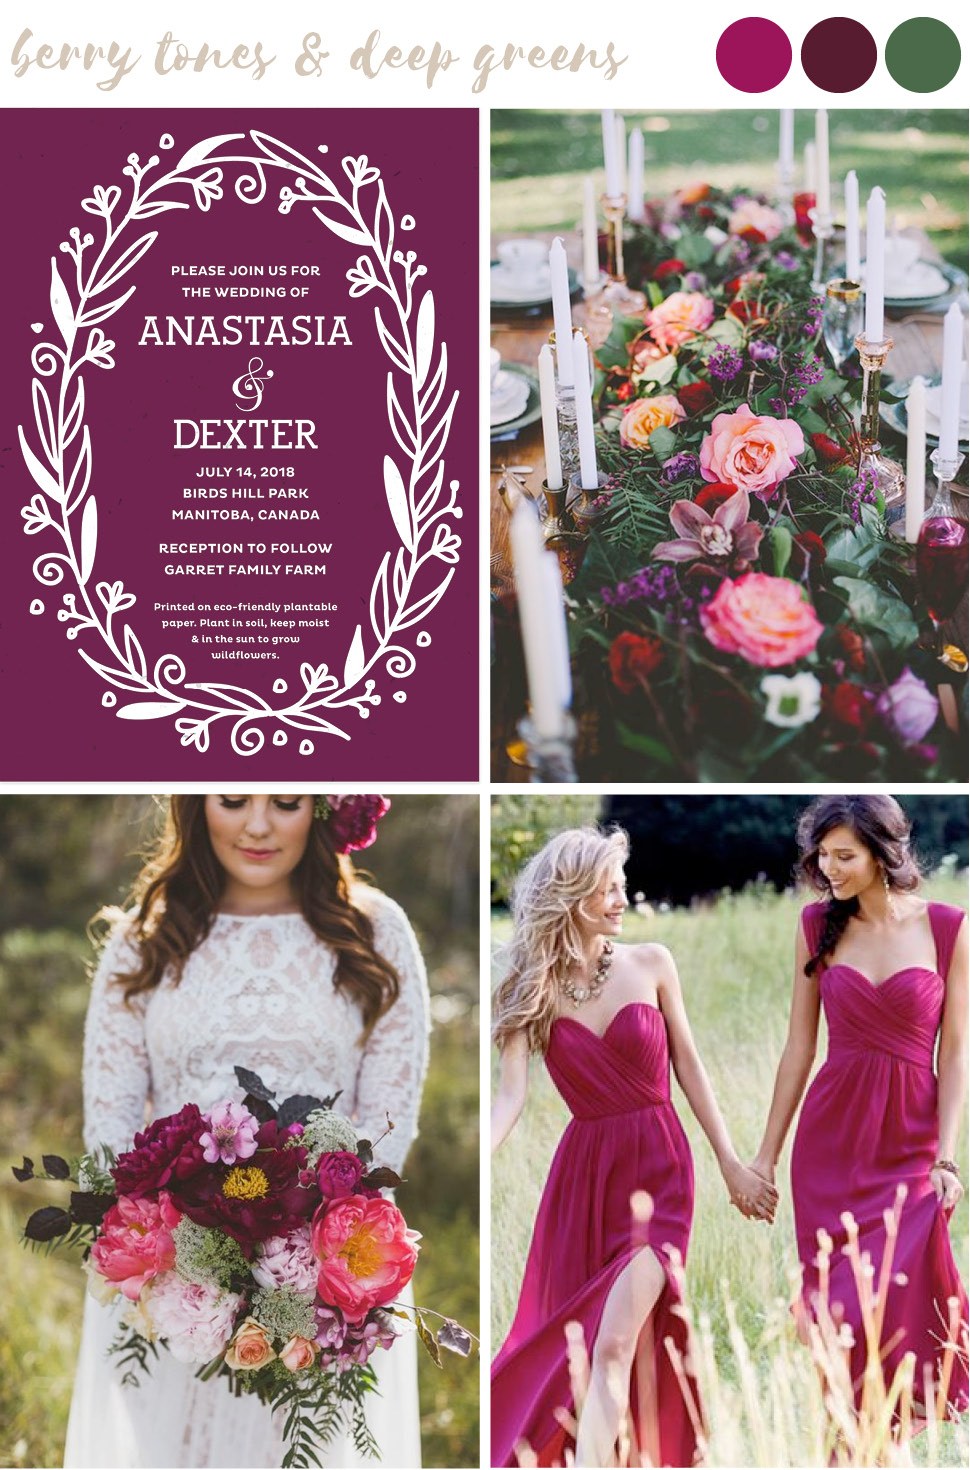 Find wedding color inspiration like this dramatic and romantic mix of berry tones and deep greens for stylish and trendy summer weddings.